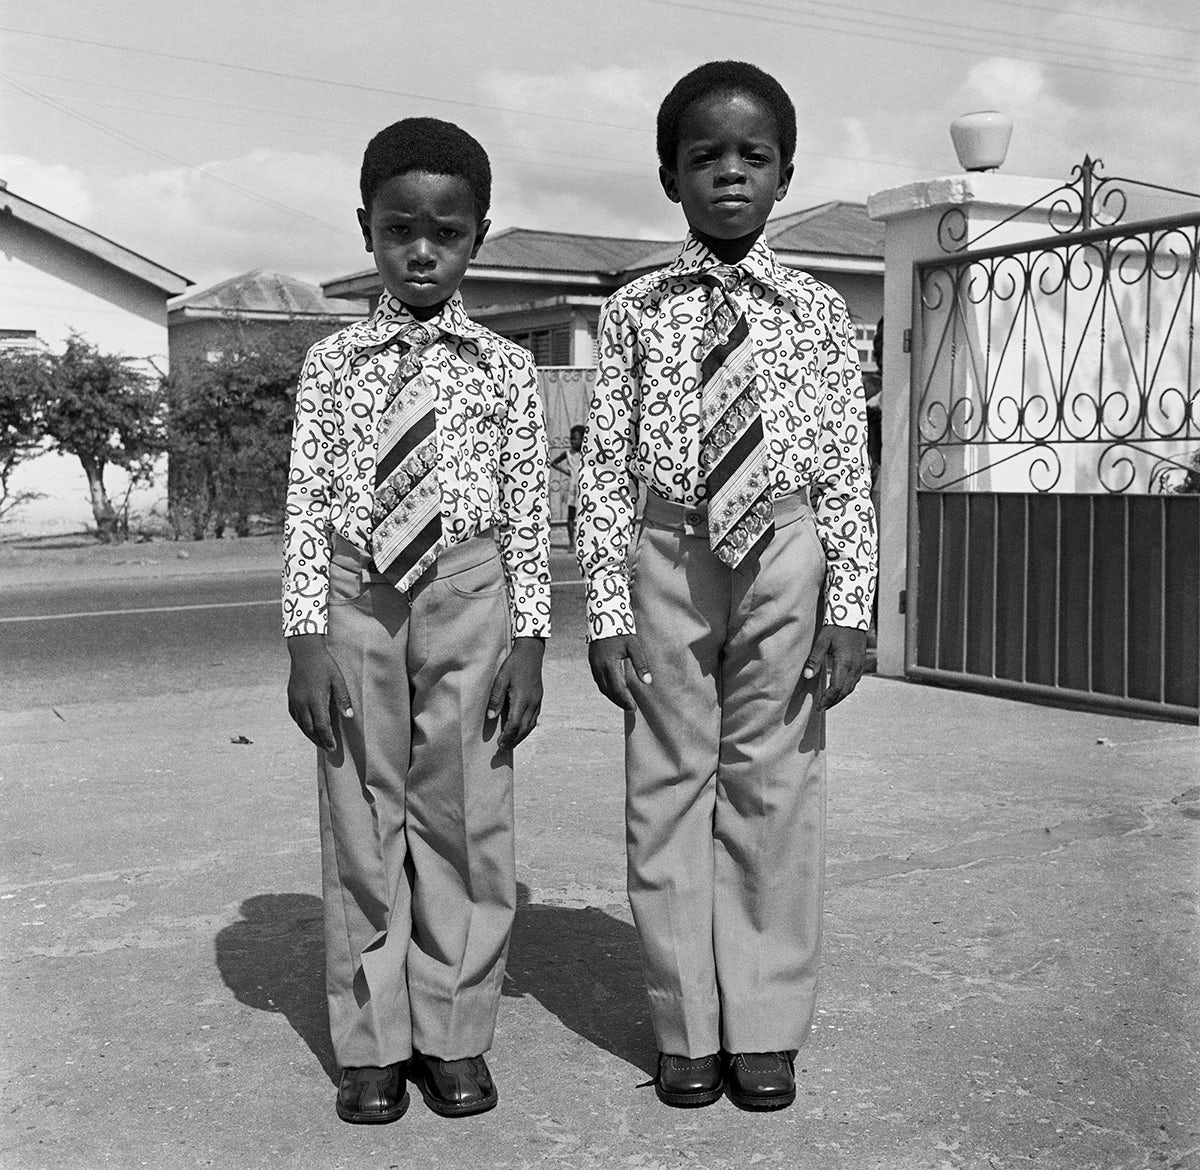 Kids dressed in identical suits, Accra, 1970s